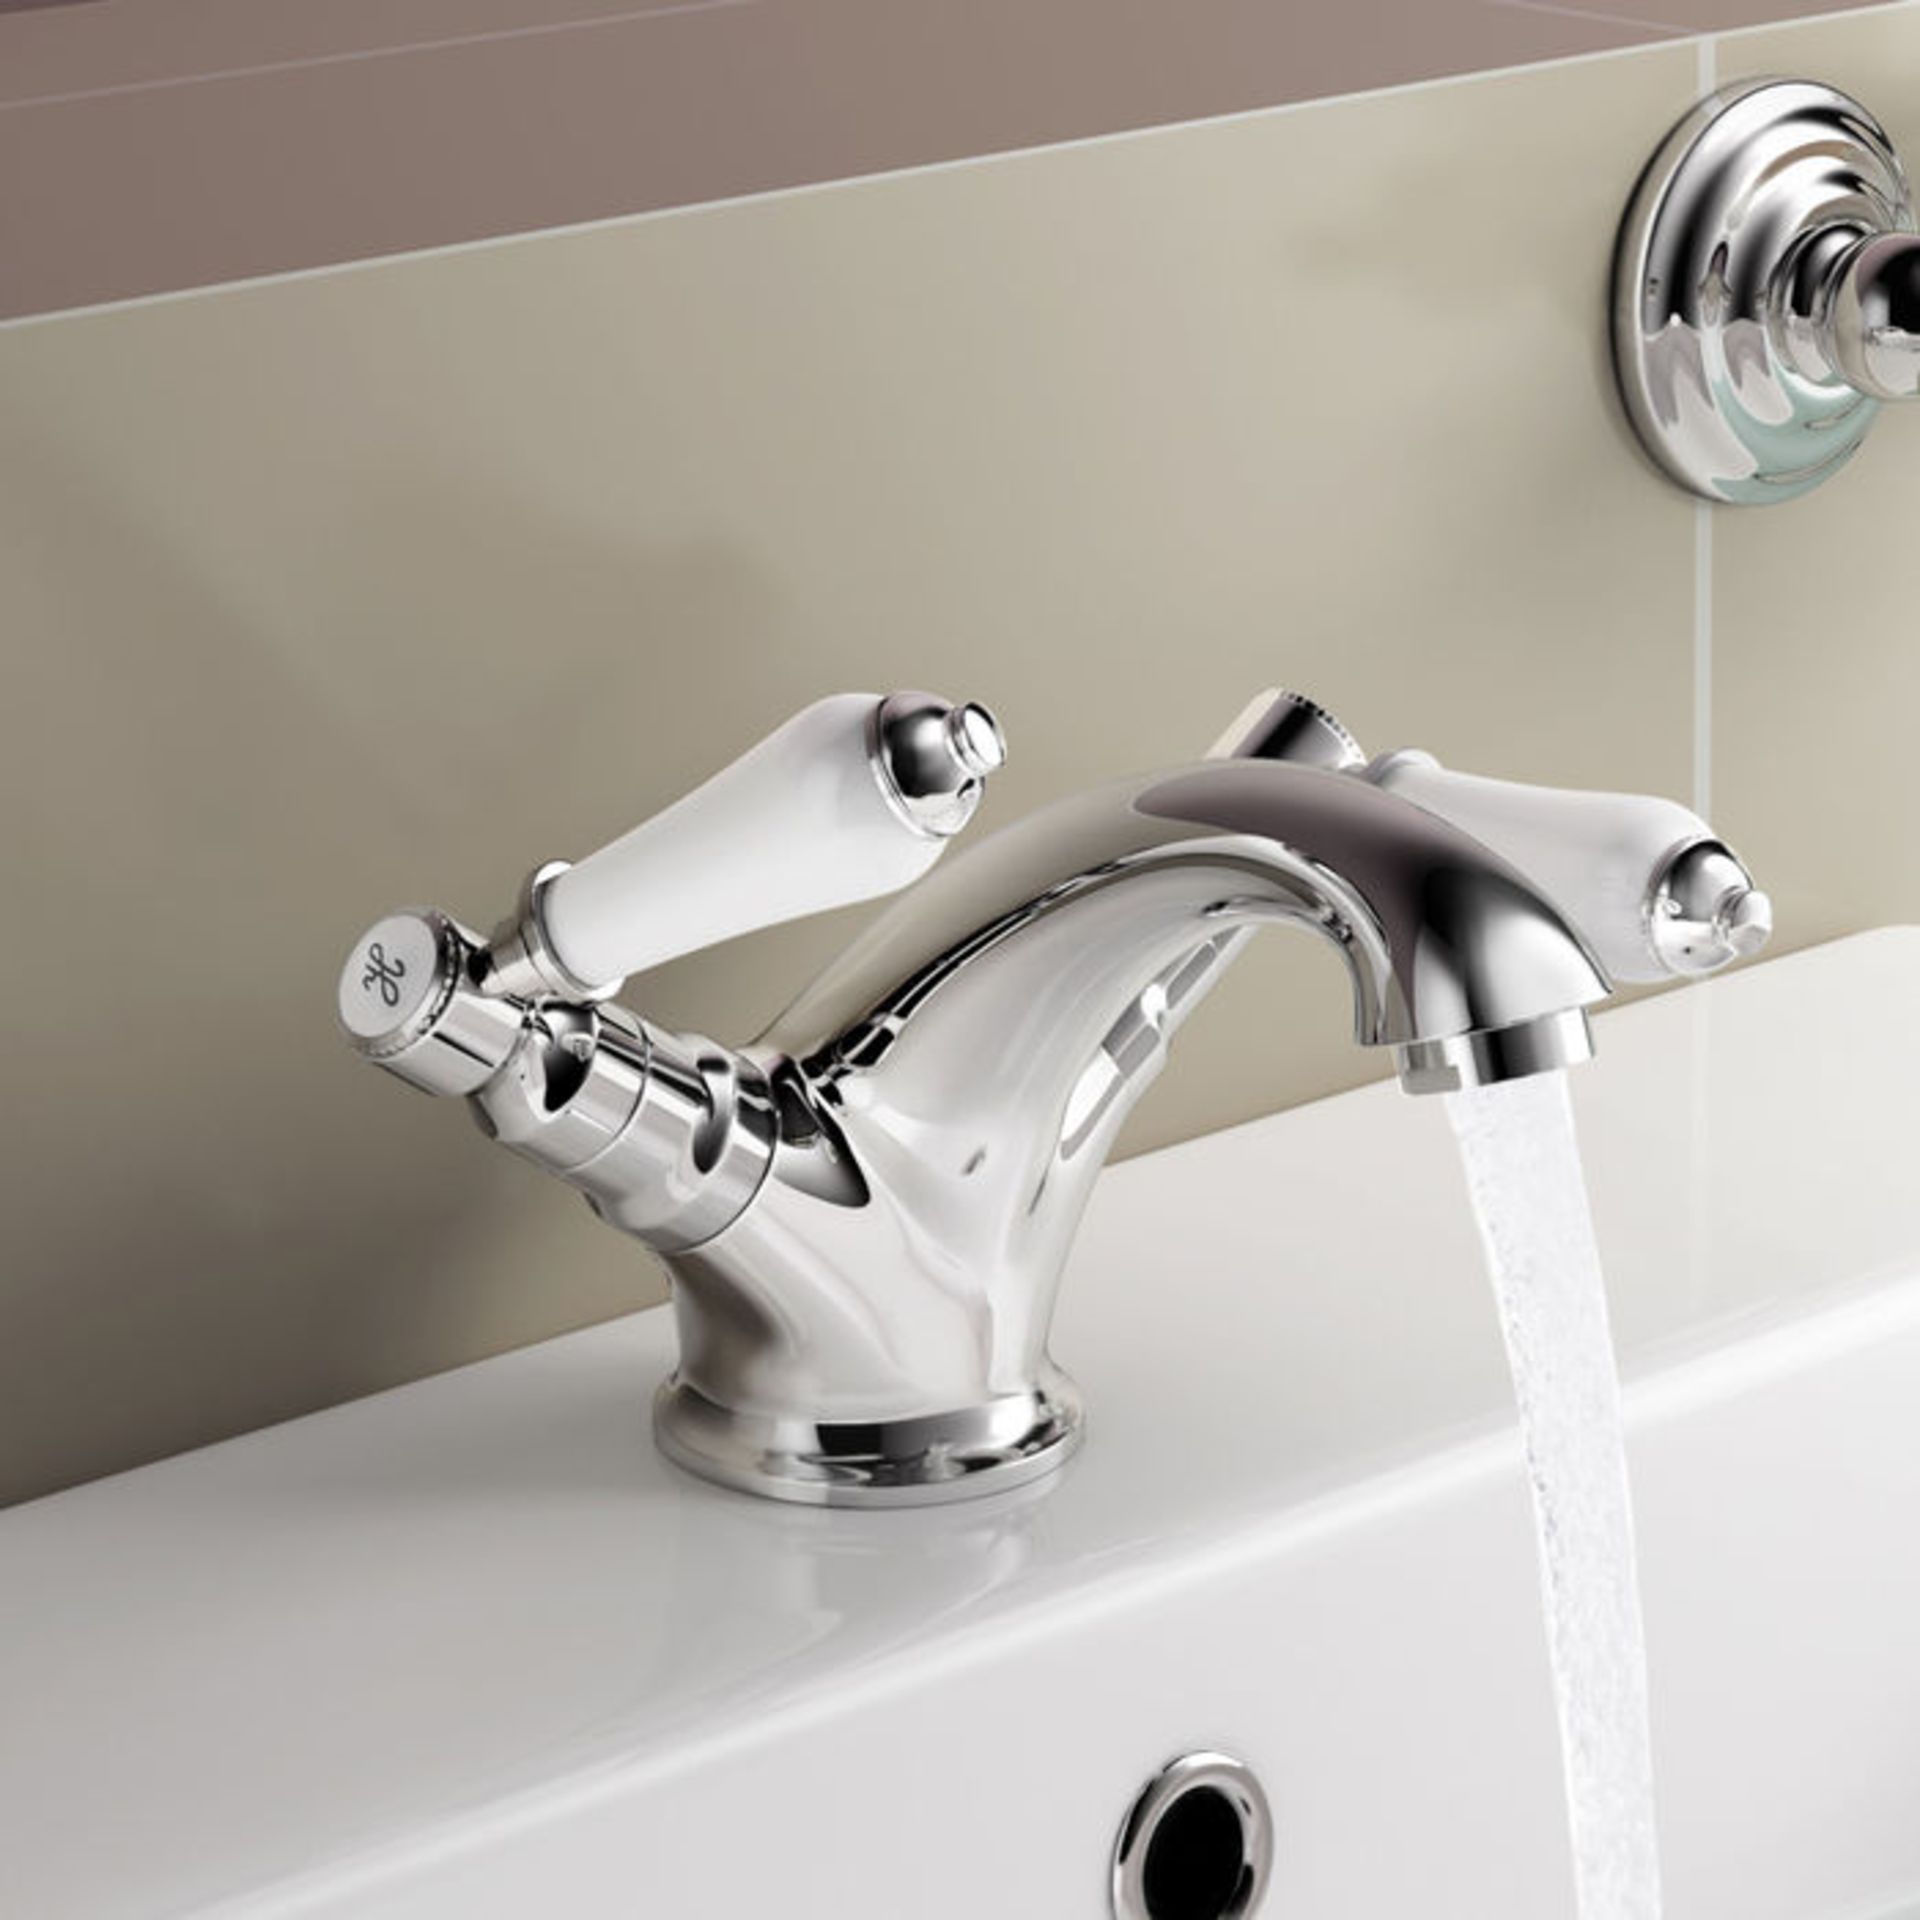 (AL31) Regal Chrome Traditional Basin Sink Lever Mixer Tap Chrome Plated Solid Brass Mixer cartridge